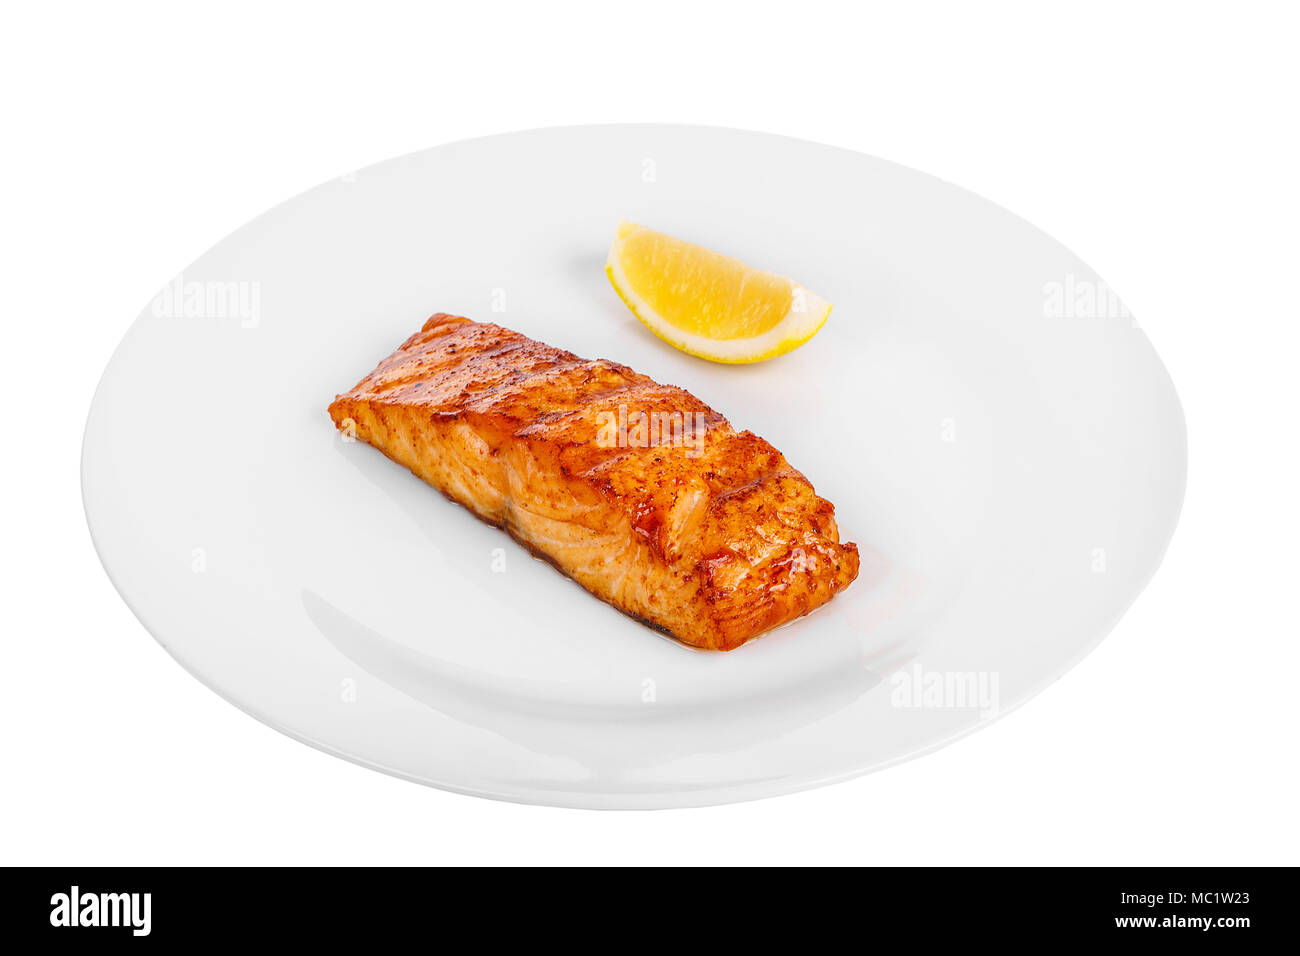 https://c8.alamy.com/comp/MC1W23/fish-trout-keta-pink-salmon-a-piece-baked-fried-over-an-open-fire-with-a-slice-of-lemon-appetizing-juicy-natural-on-white-isolated-backgrou-MC1W23.jpg